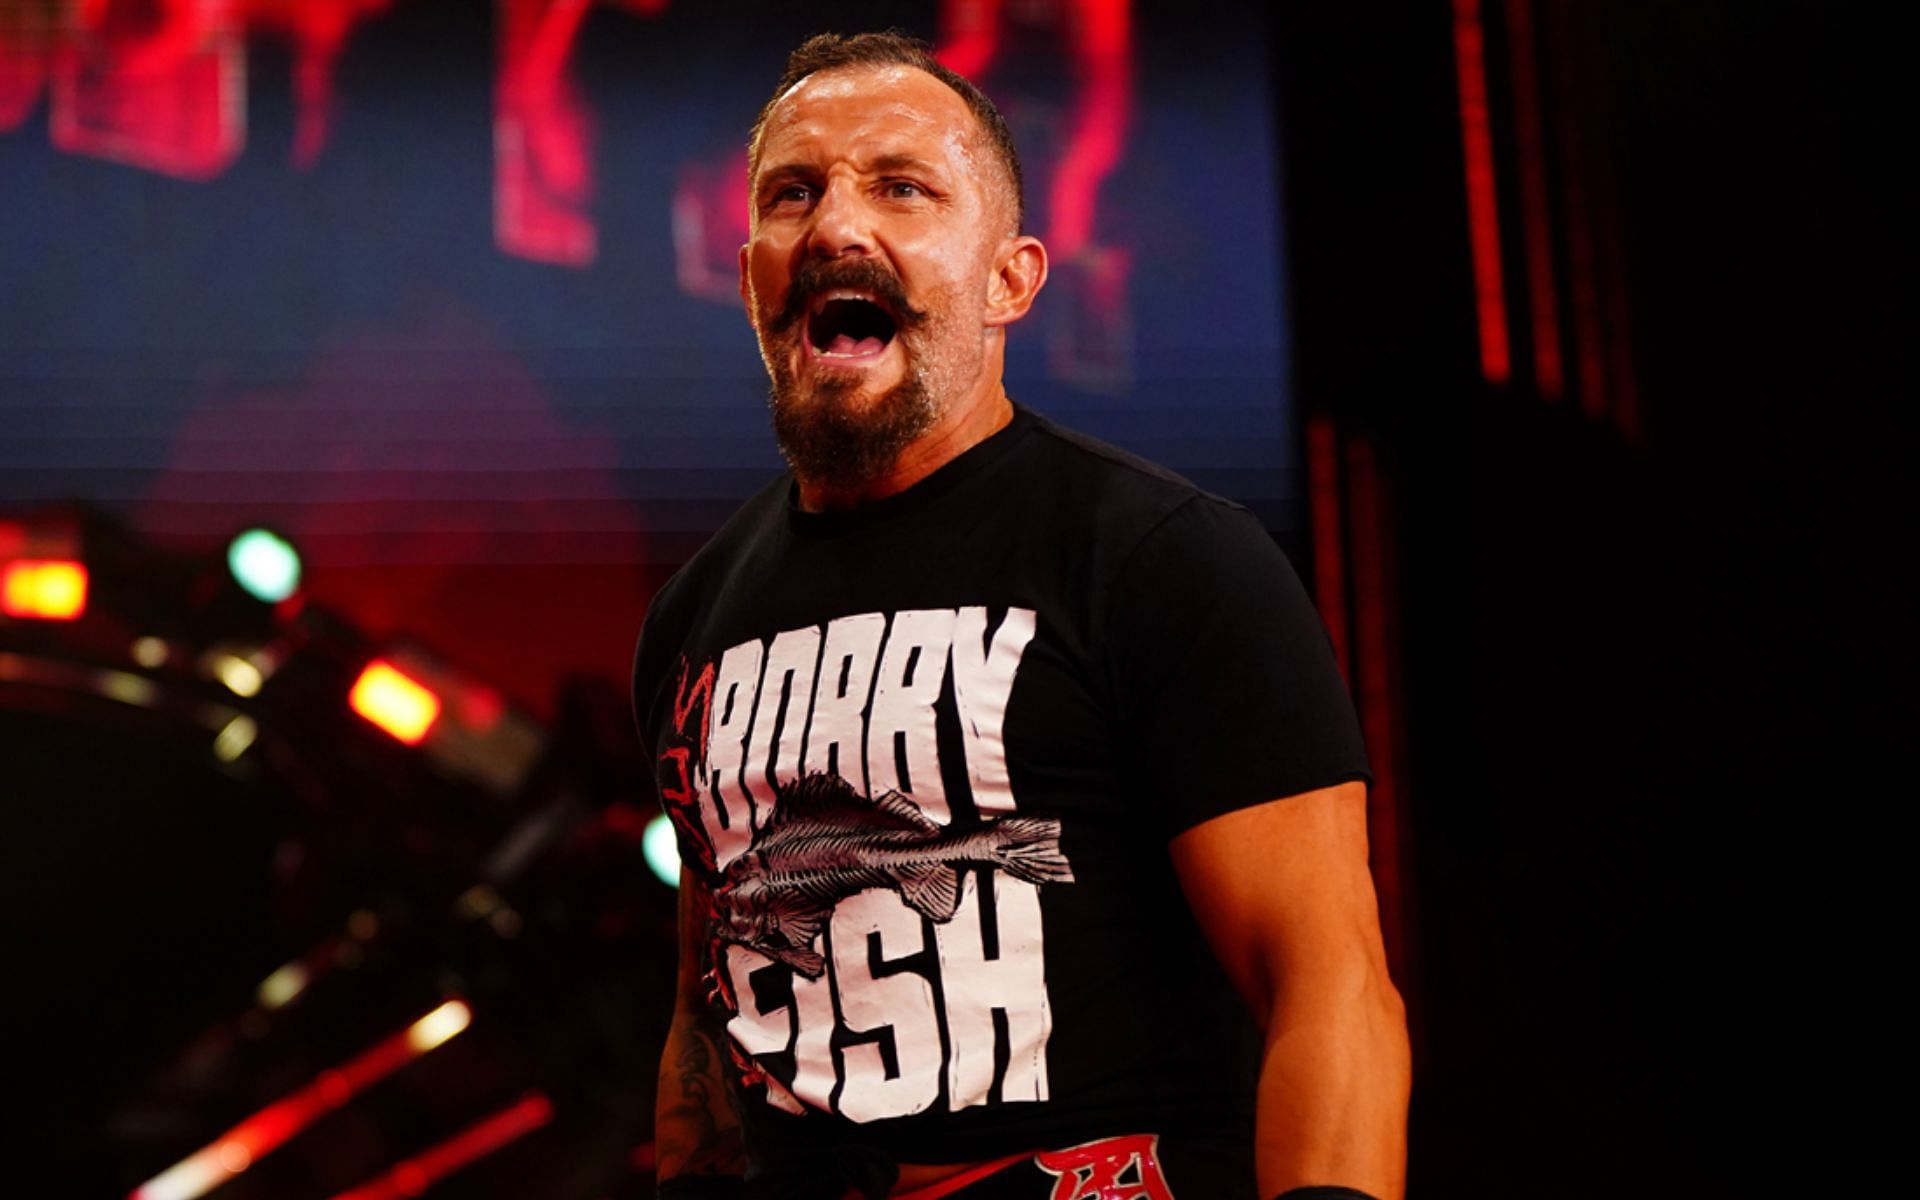 One-half of the reDRagon tag team, Bobby Fish.